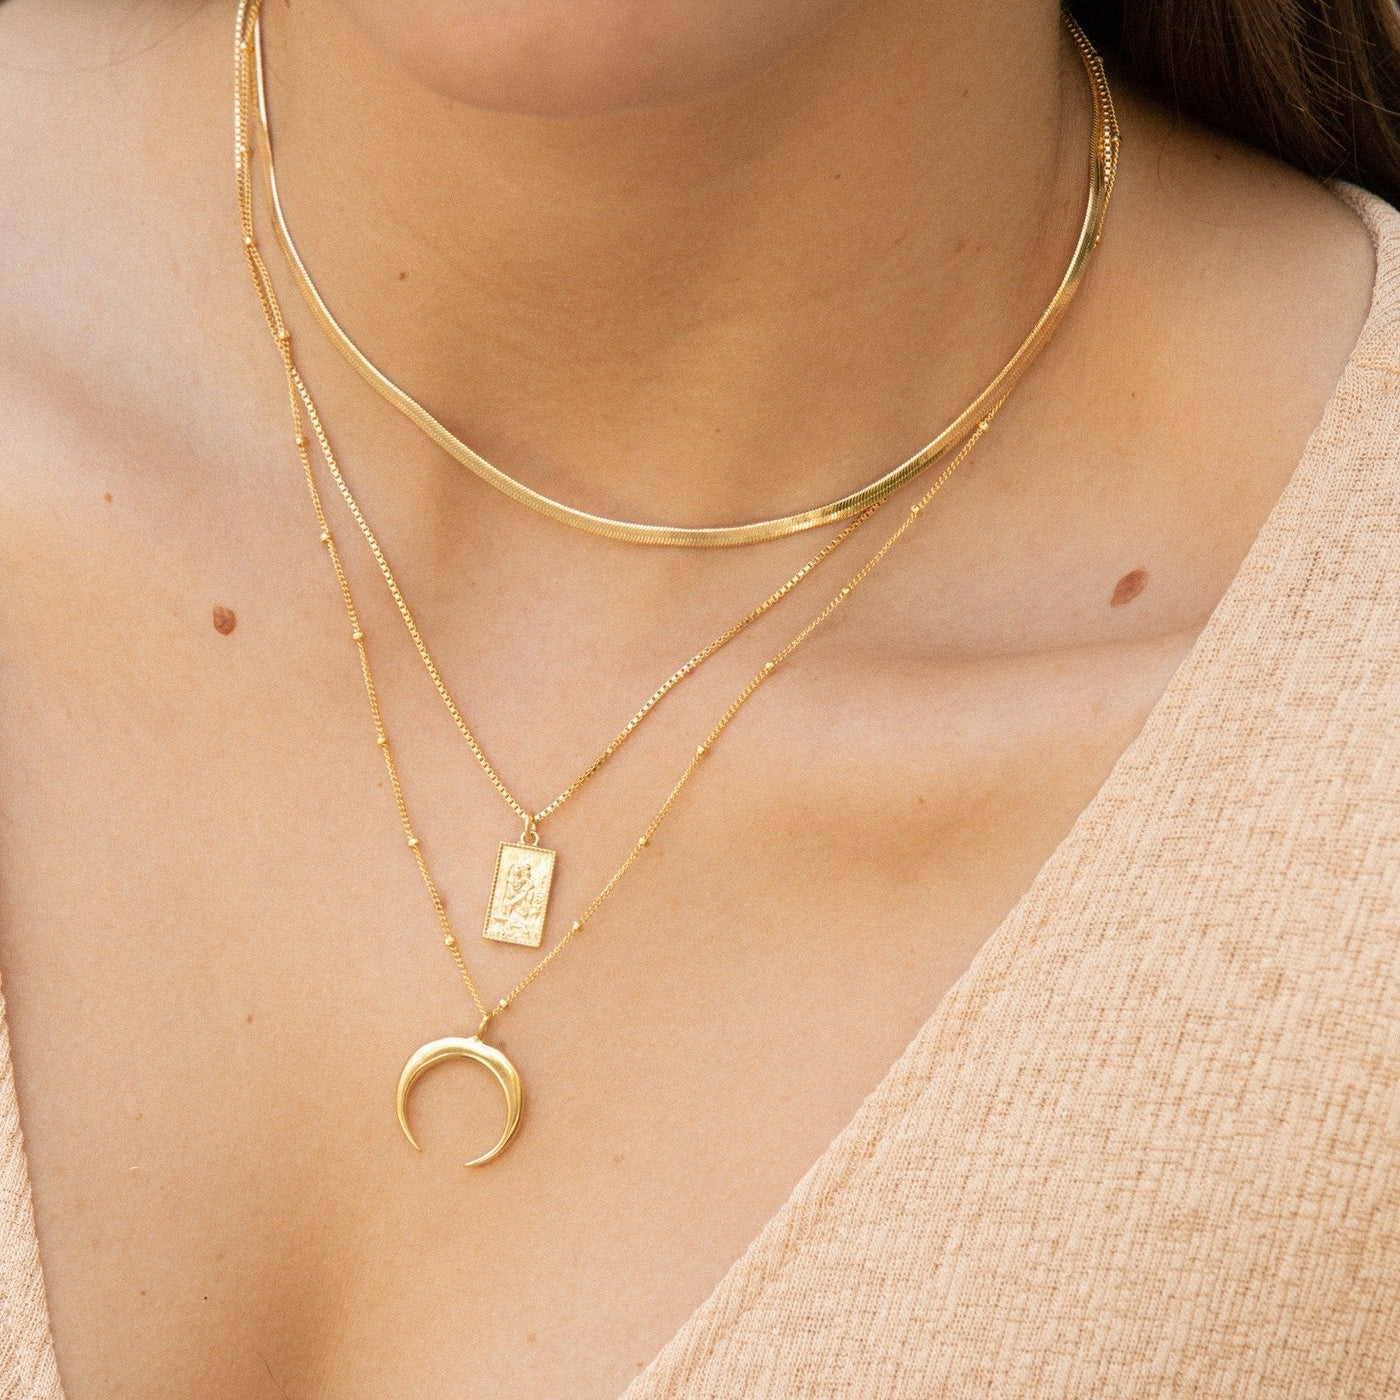 Gold Herringbone Necklace by Simple & Dainty Jewelry